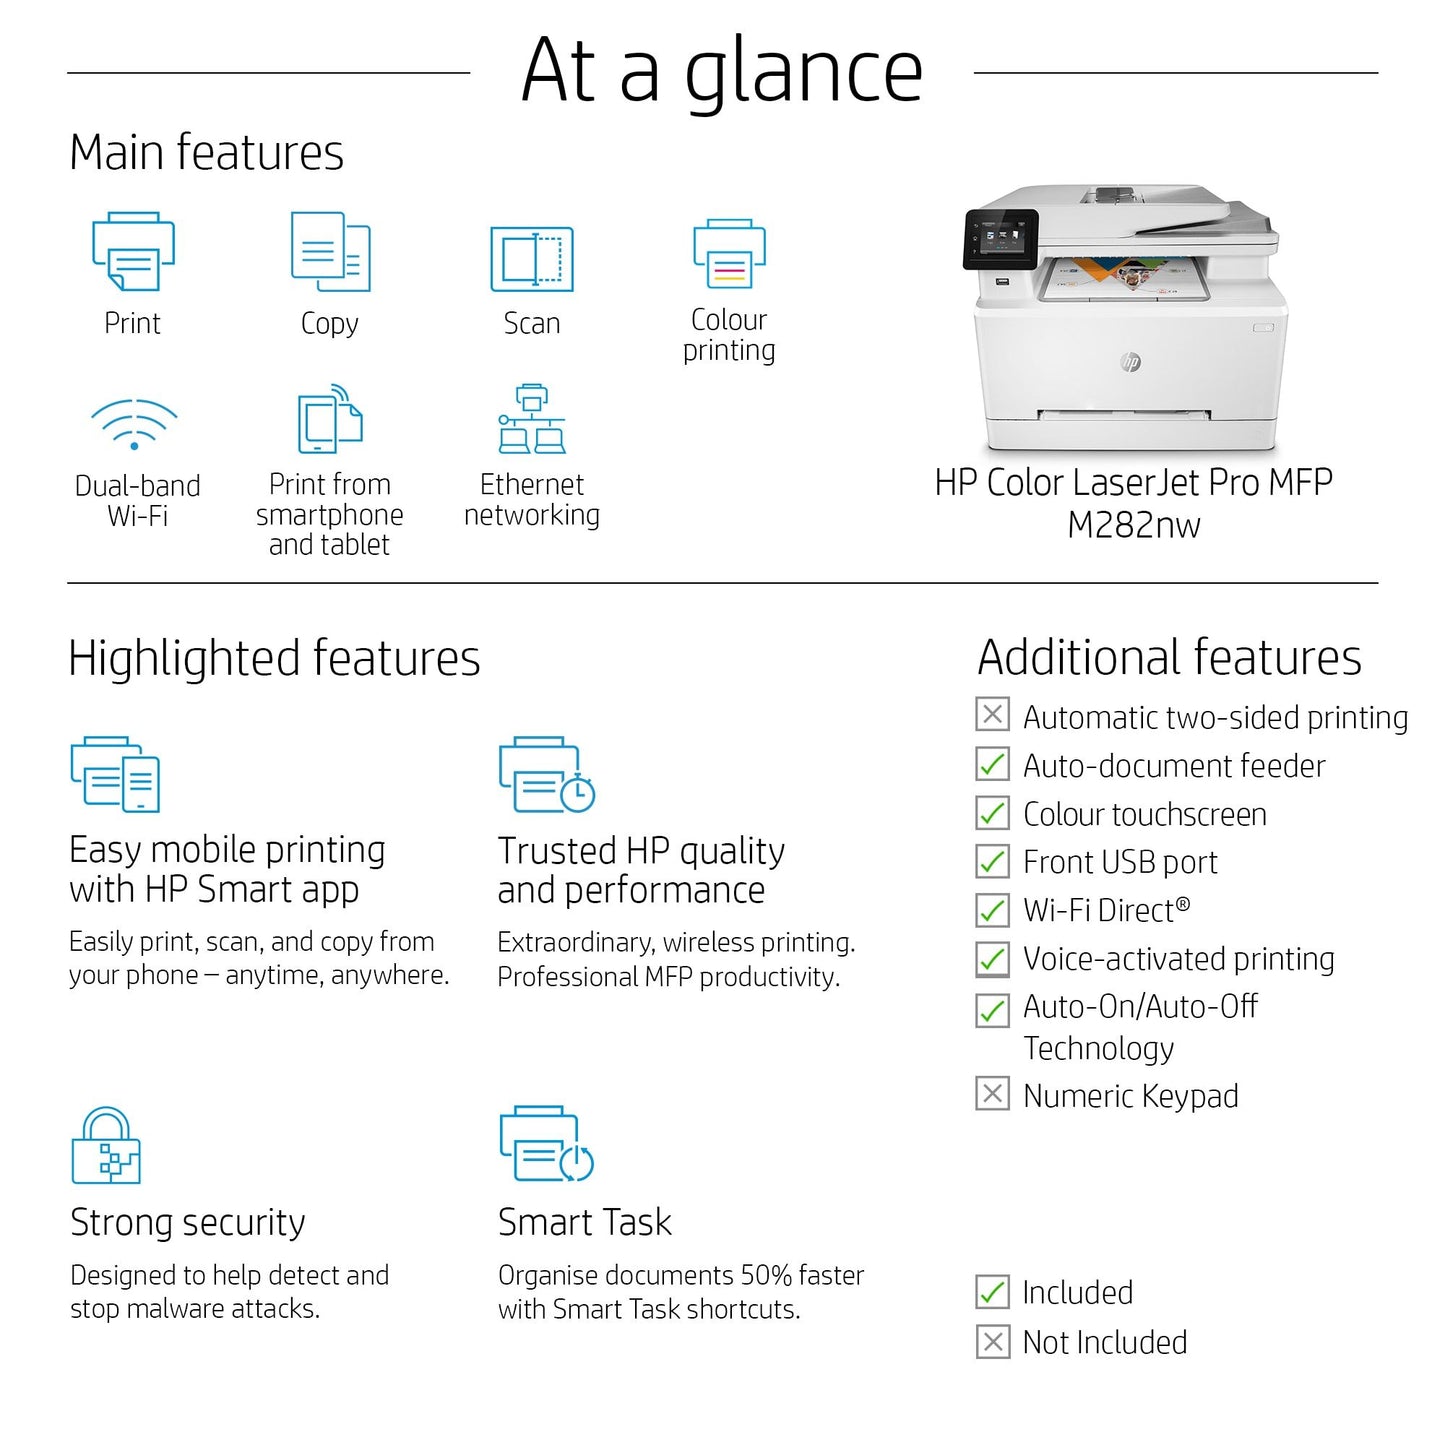 HP Color LaserJet Pro MFP M282nw, Color, Printer for Print, Copy, Scan, Front-facing USB printing; Scan to email; 50-sheet uncurled ADF